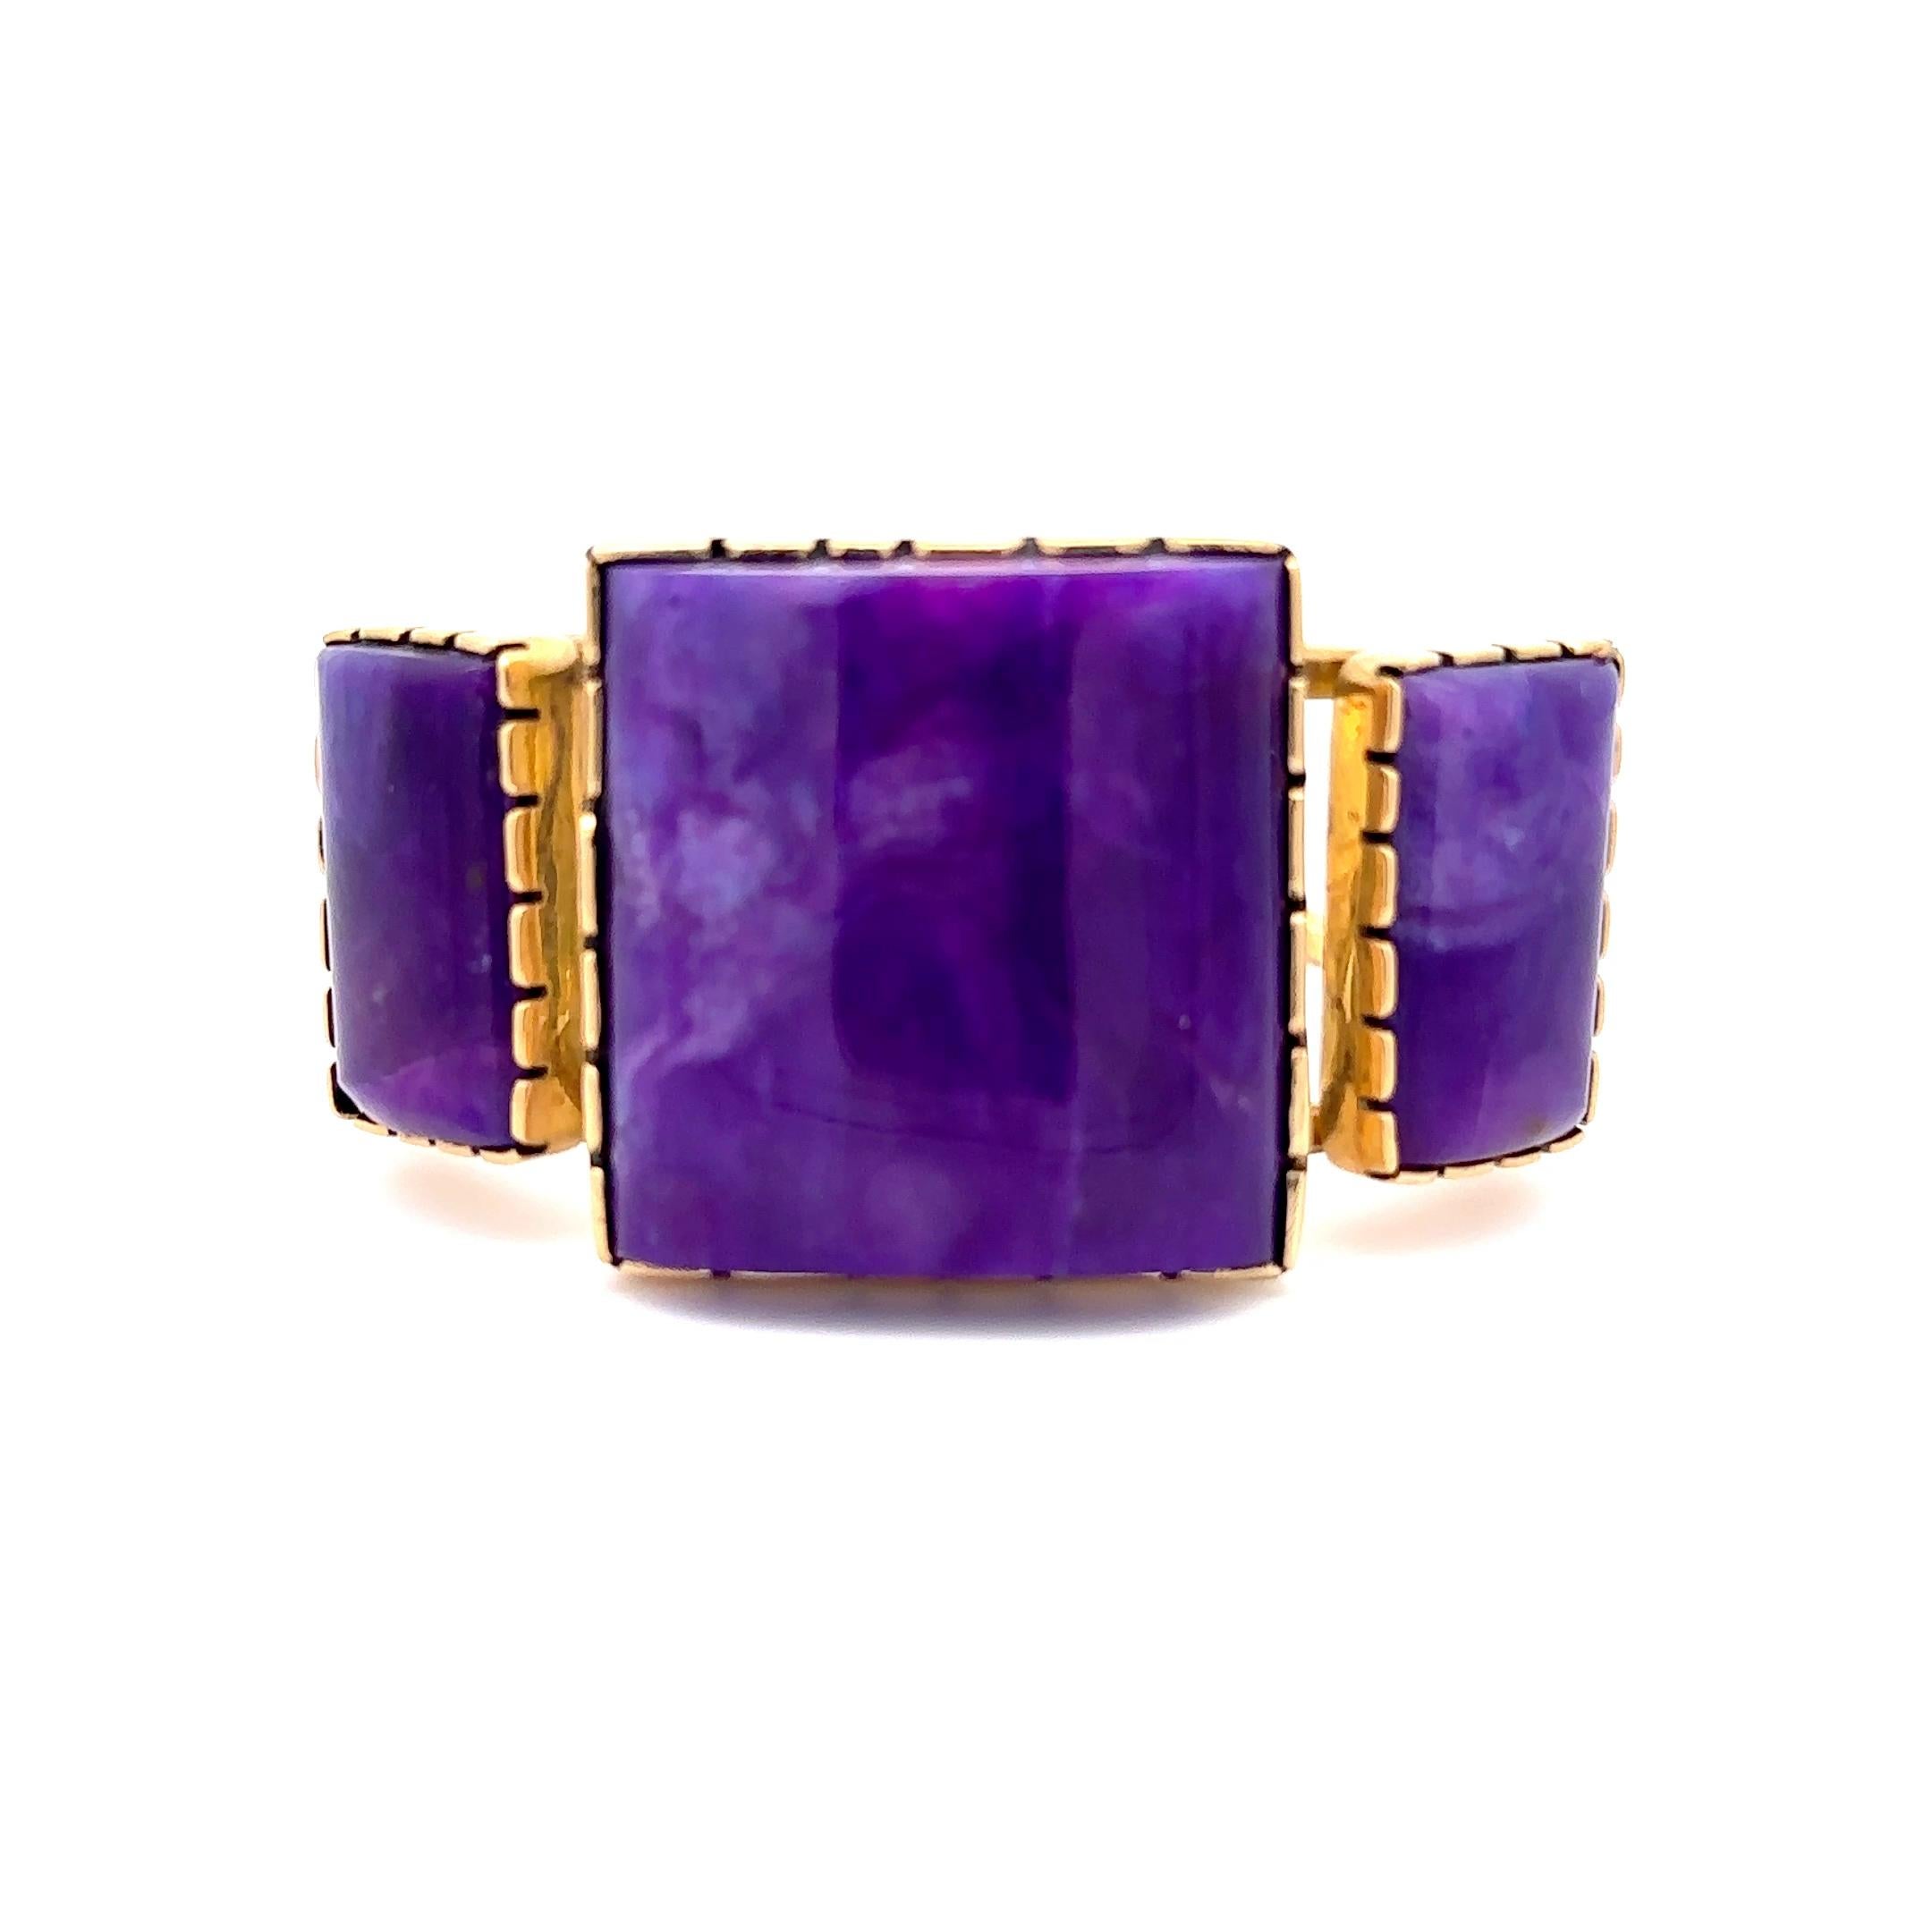 Introducing an extraordinary bracelet that will captivate your senses. Behold the sheer brilliance of this rare 18k yellow gold cuff, delicately set in sugilite—a true testament to Native American artist Noah Pfeiffer's exceptional craftsmanship.